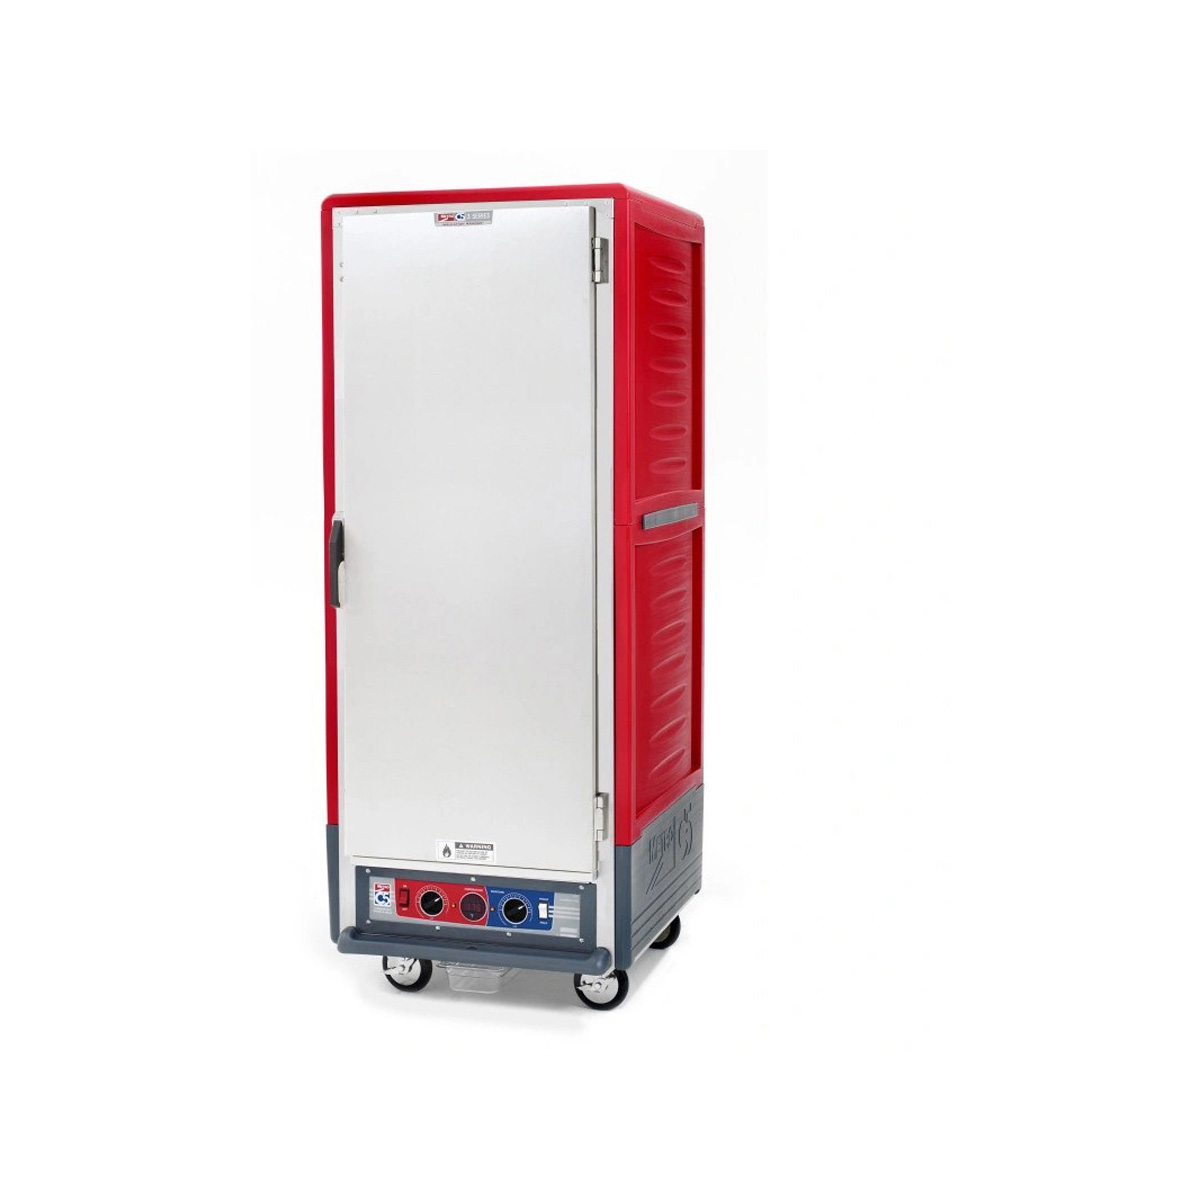 Metro C539-CFS-U C5 3 Series Mobile Heated Proofing and Holding Cabinet